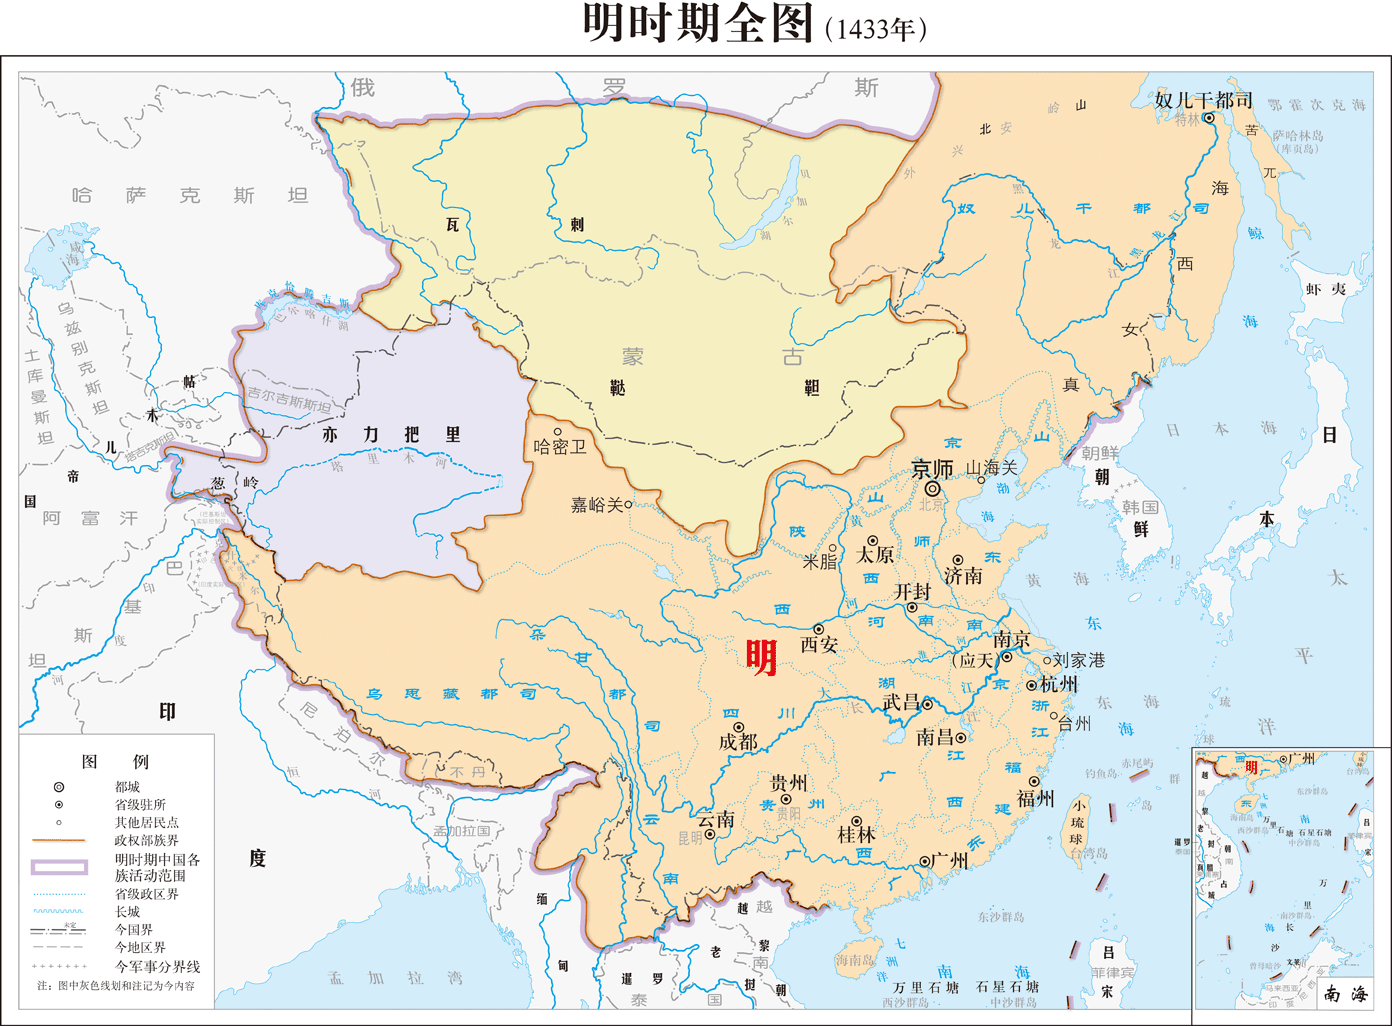 Location of Ming